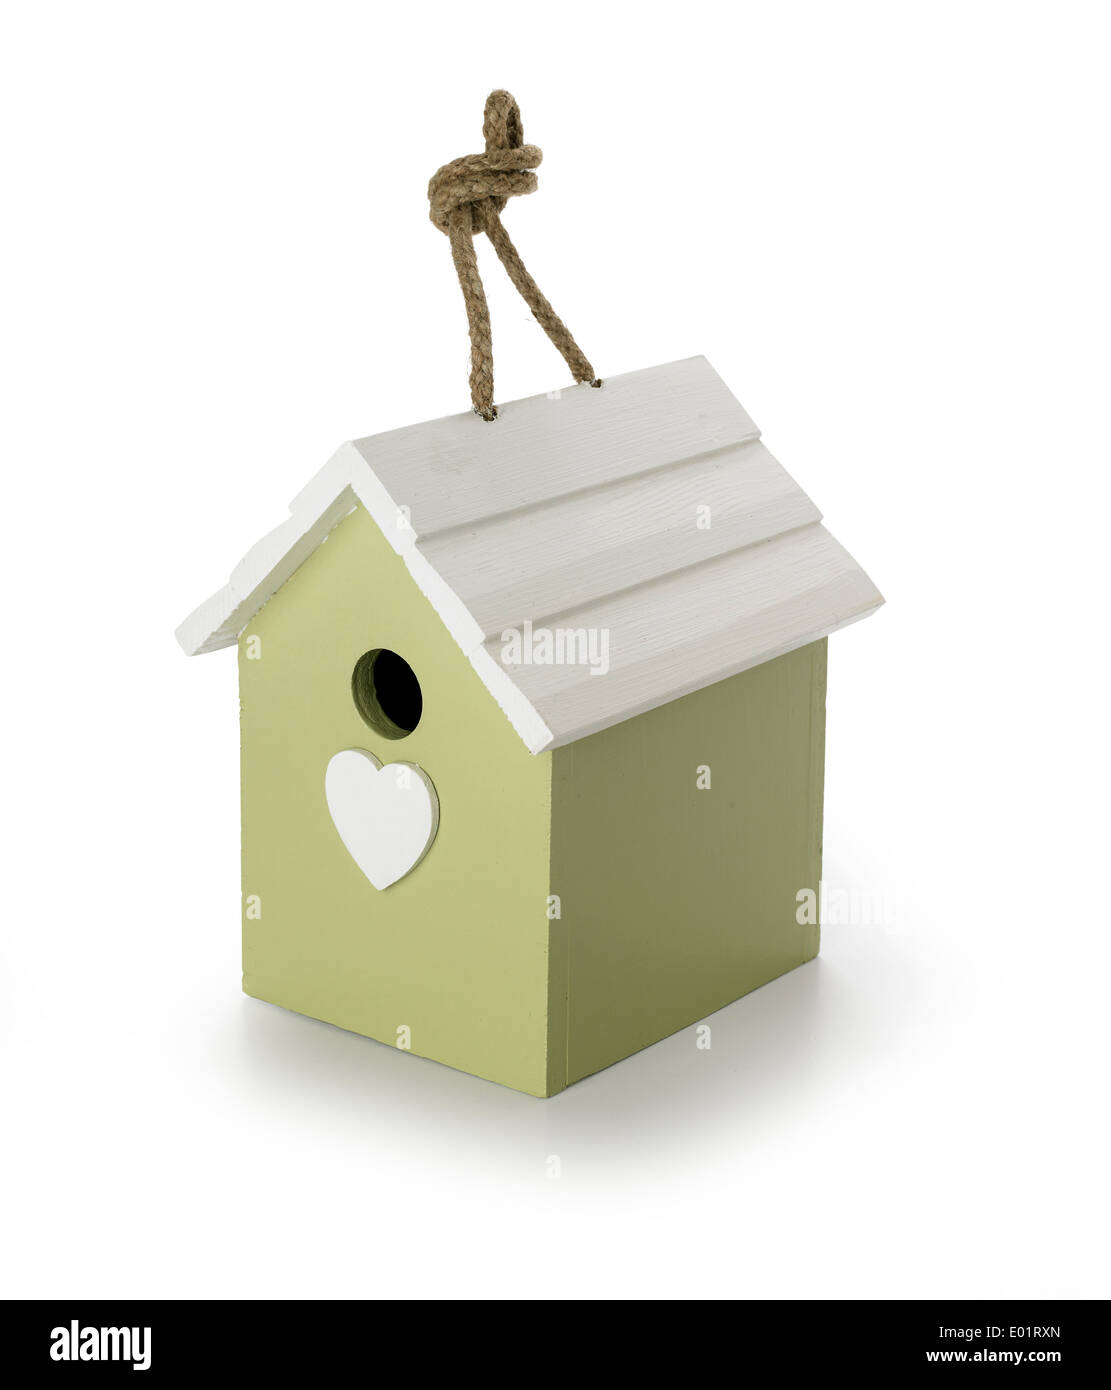 Bird house with rope to hang Stock Photo